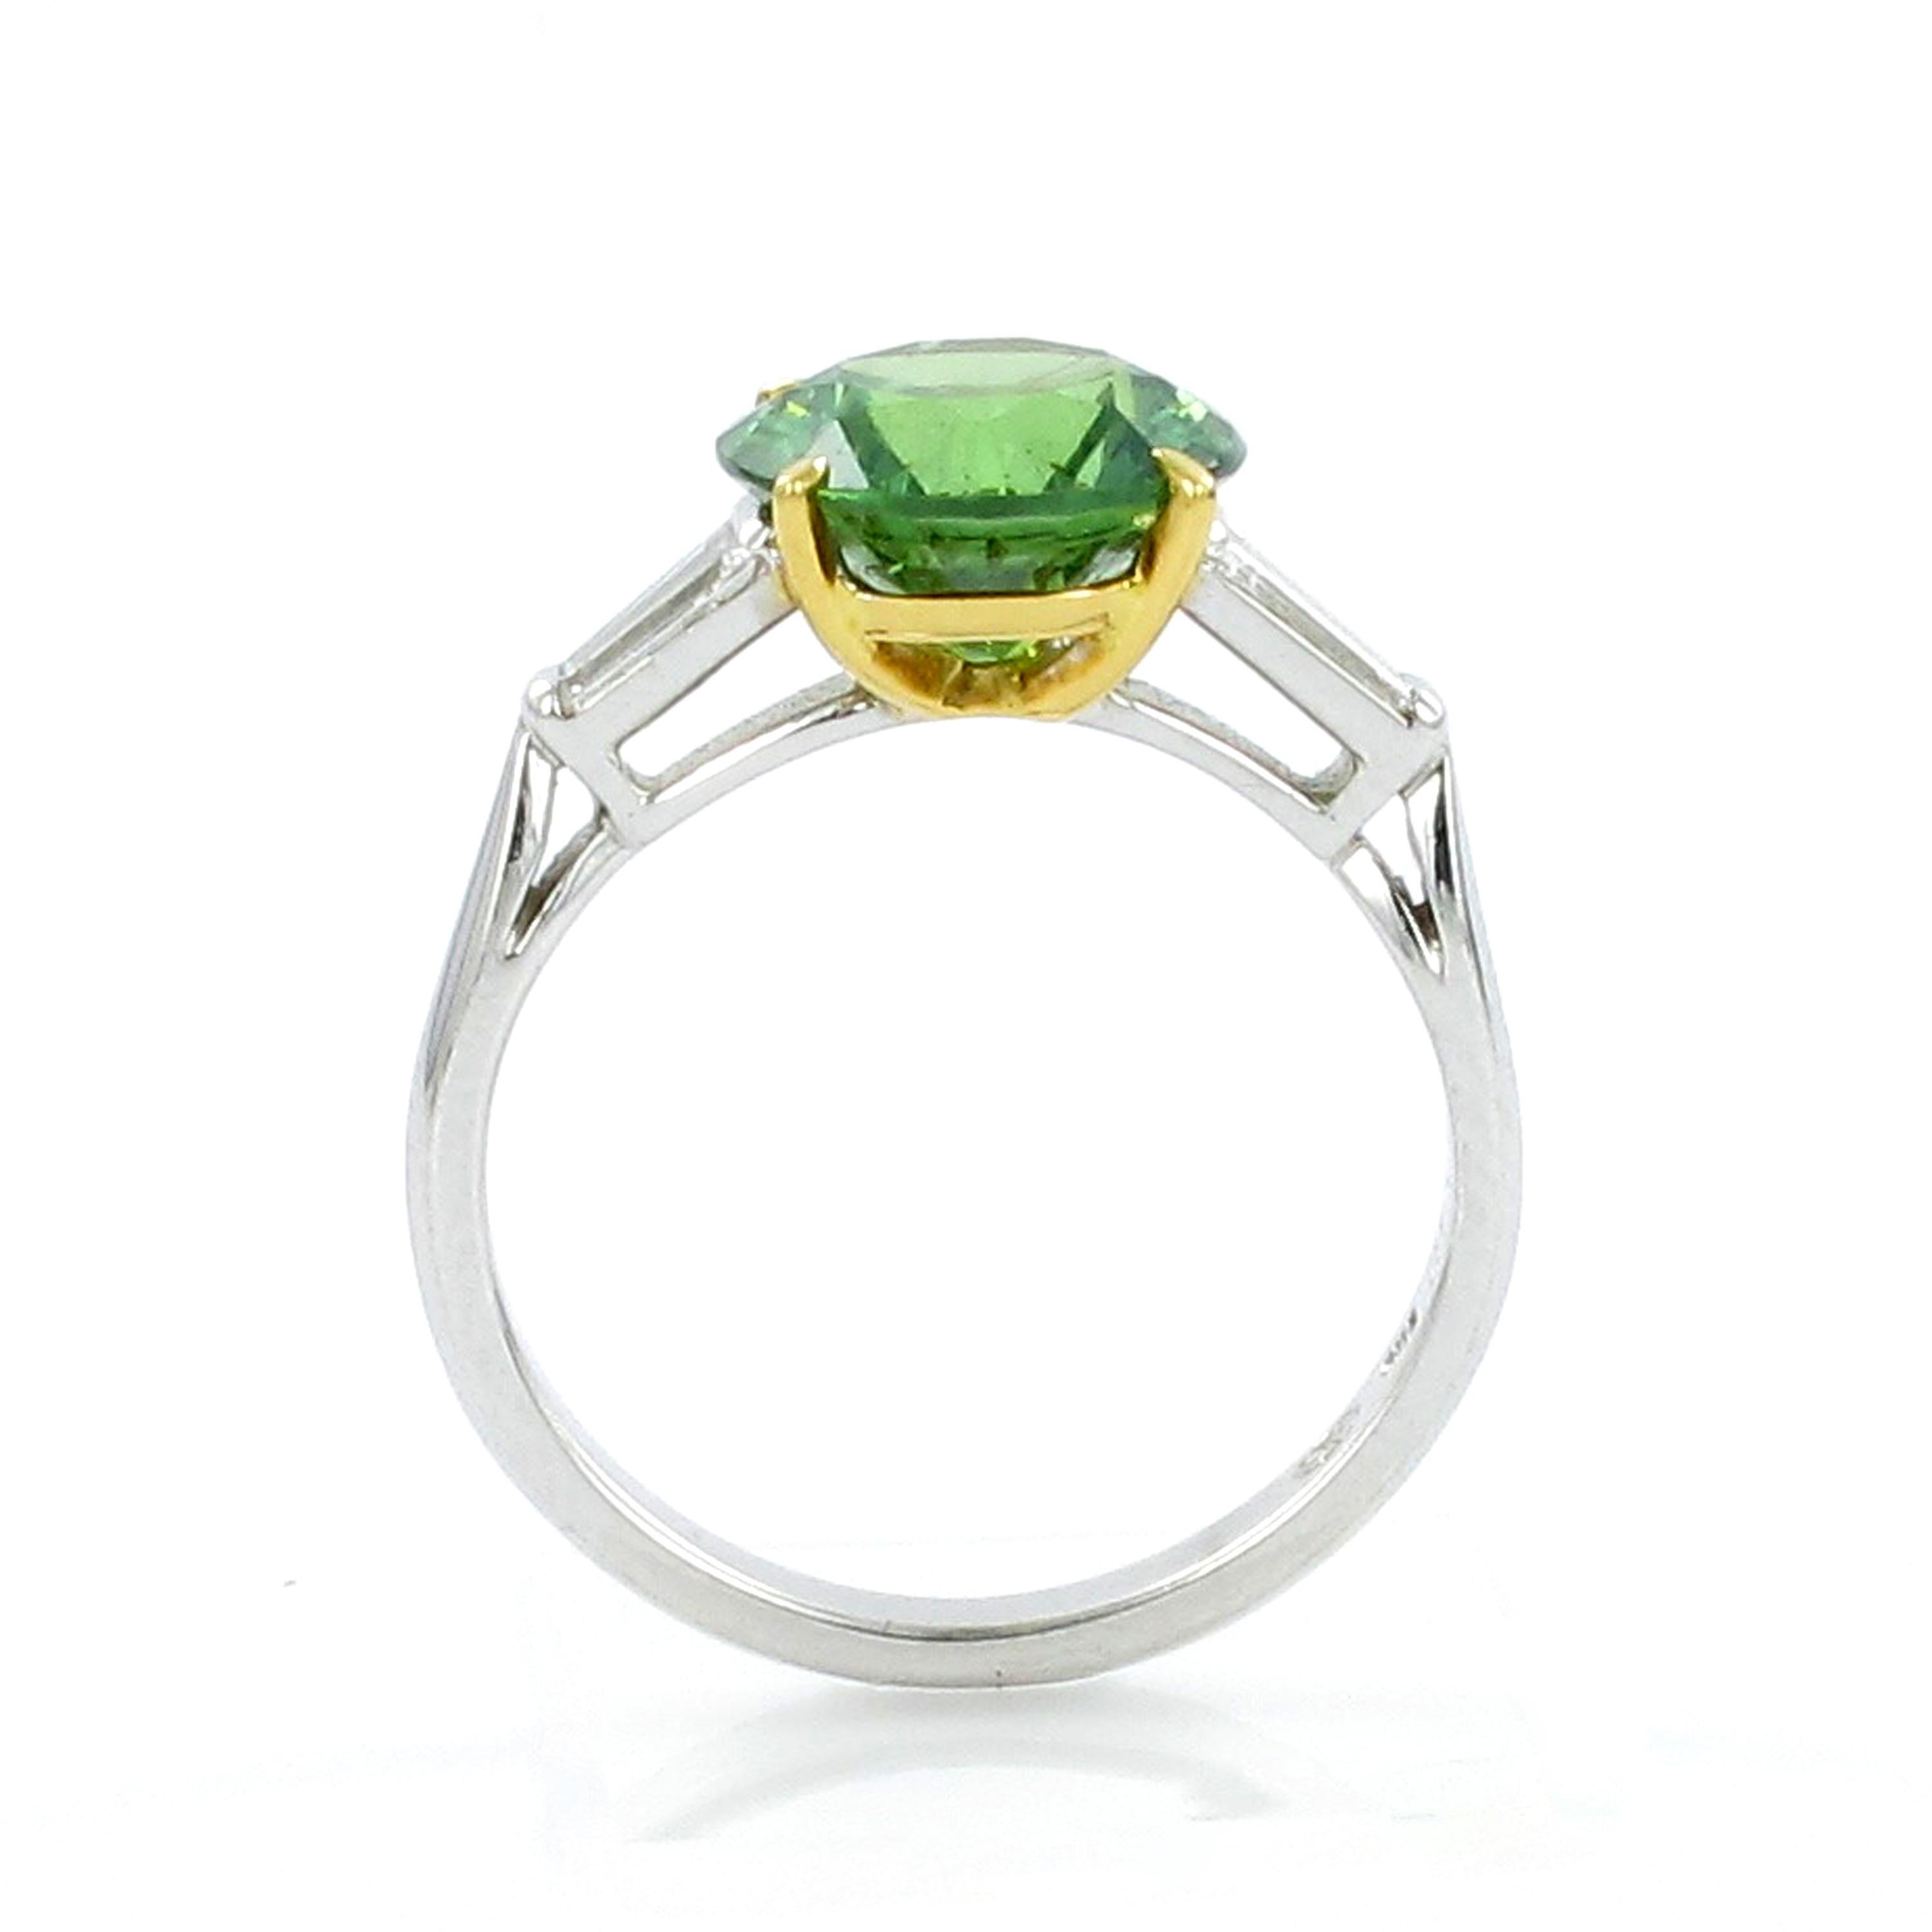 Classic solitaire ring in white gold 750. Center set in four yellow gold prongs with a rare Brazilian demantoid garnet of 3.01 ct. The round brilliant cut gem measures 9.05 mm in diameter. Demantoid garnet is a green variety of andradite garnet